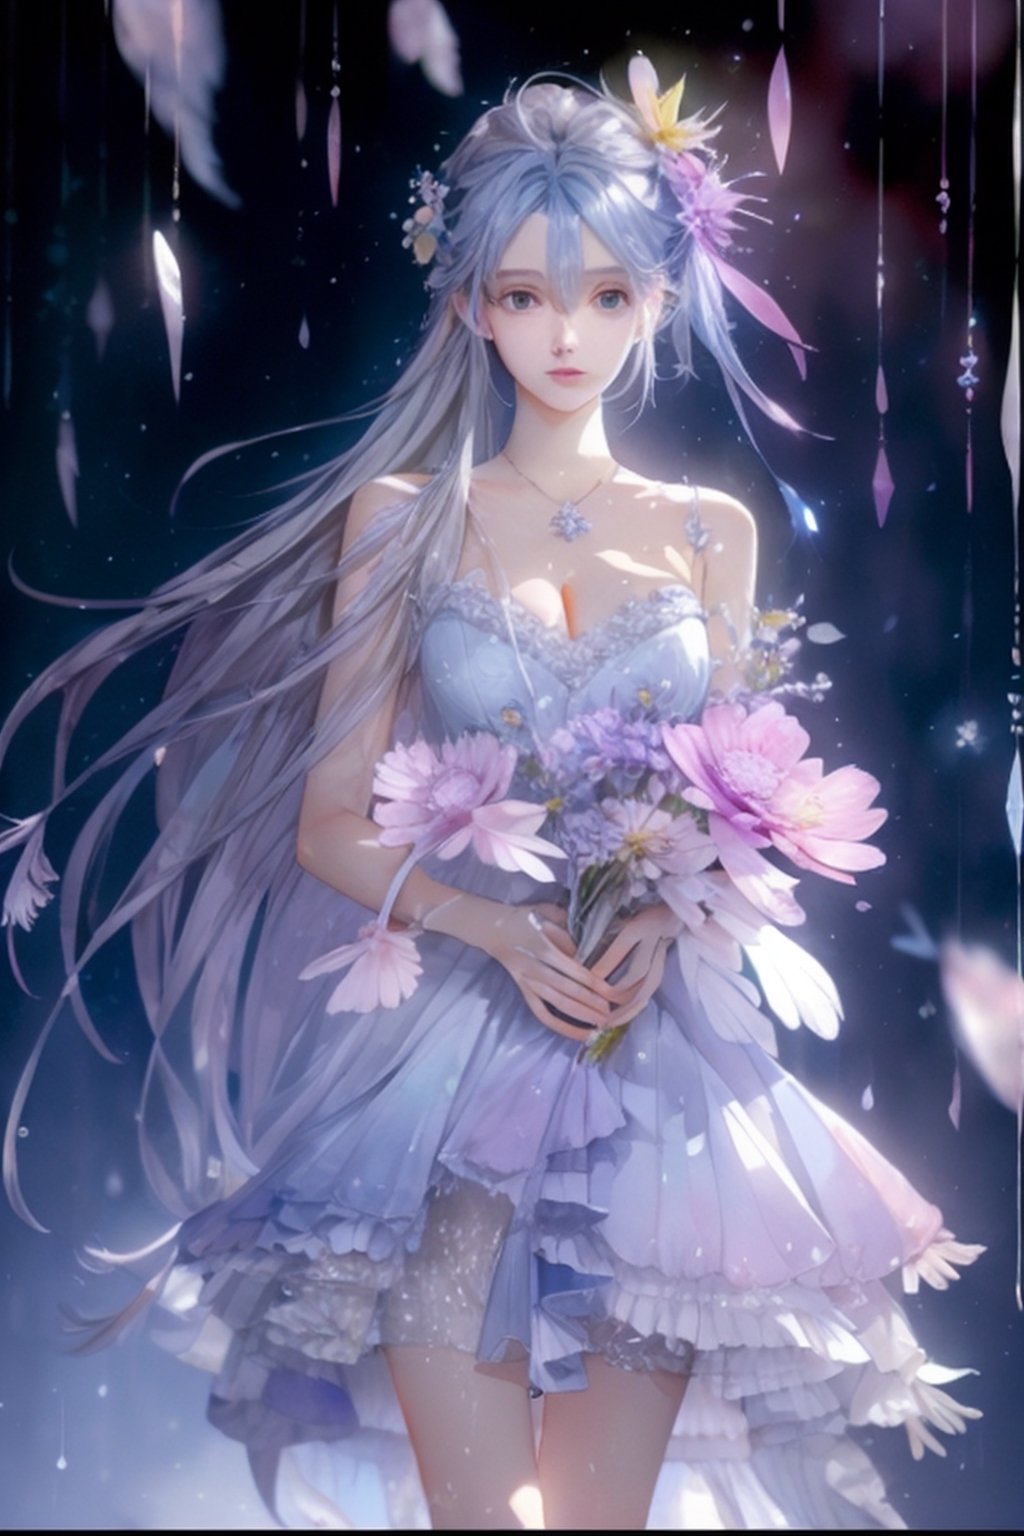 Watercolor painting, (Beautifully Aesthetic:1.2), (1girl:1.3), (colorful hair, Half blue and half grey hair:1.2), water, liquid, natta, colorful, Purple and yellow anemone flowers bloom around, Anemone blooming on the head, beautiful night, Starry sky, It's raining, Sateen, Fantastic night out,watercolor
,1 girl,midjourney,yuzu